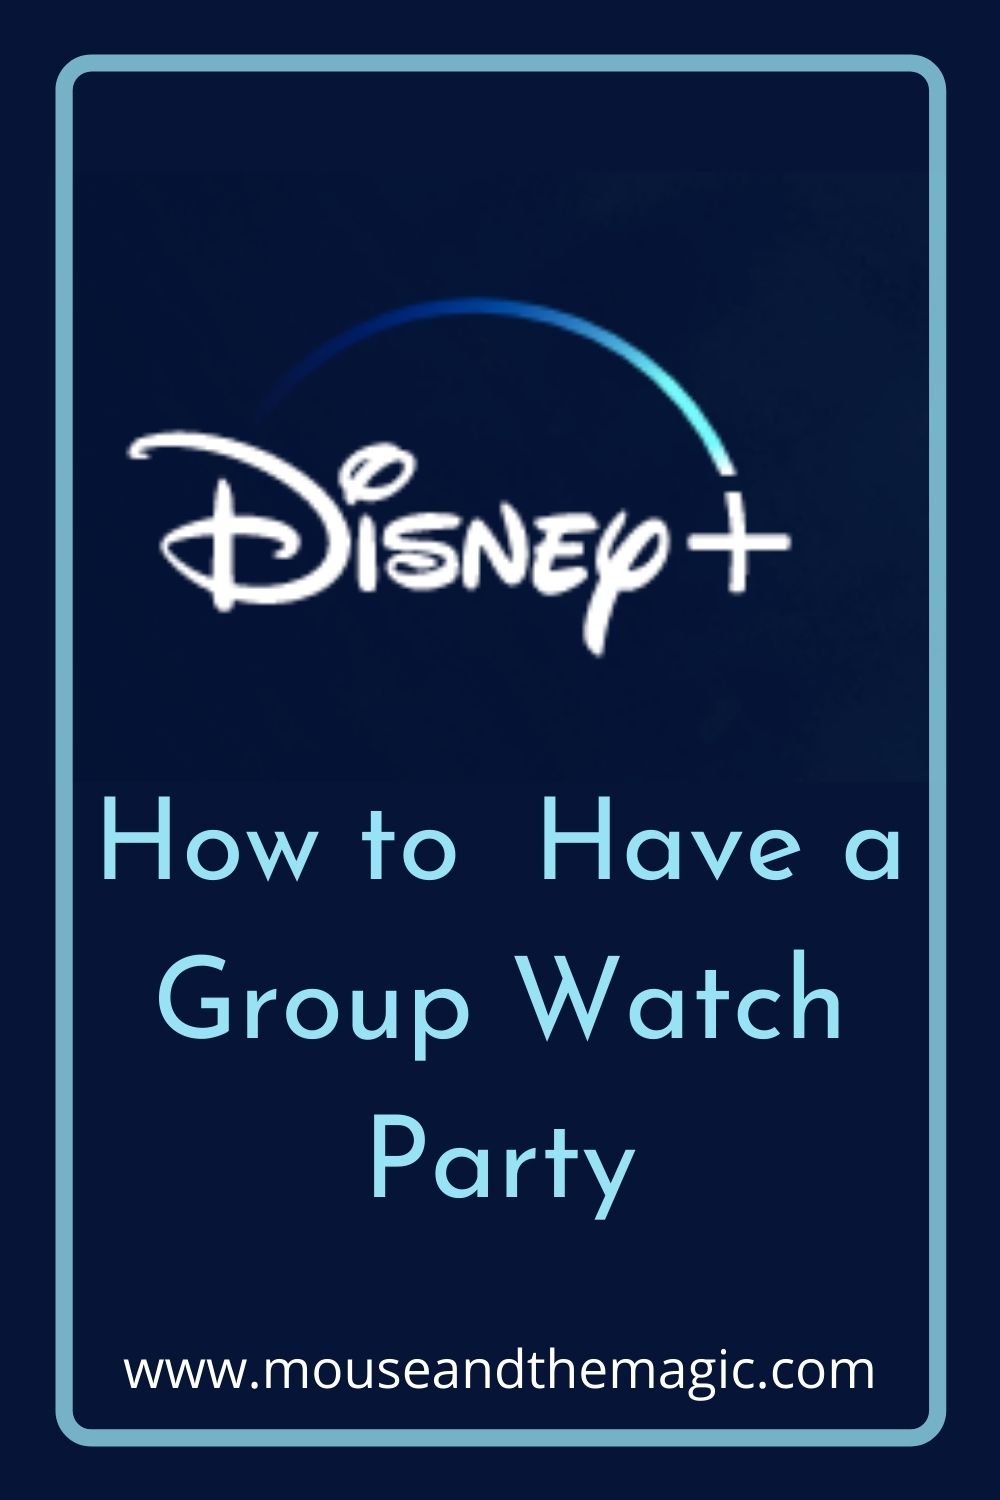 How to Host a Disney Plus Group Watch - a step by step guide